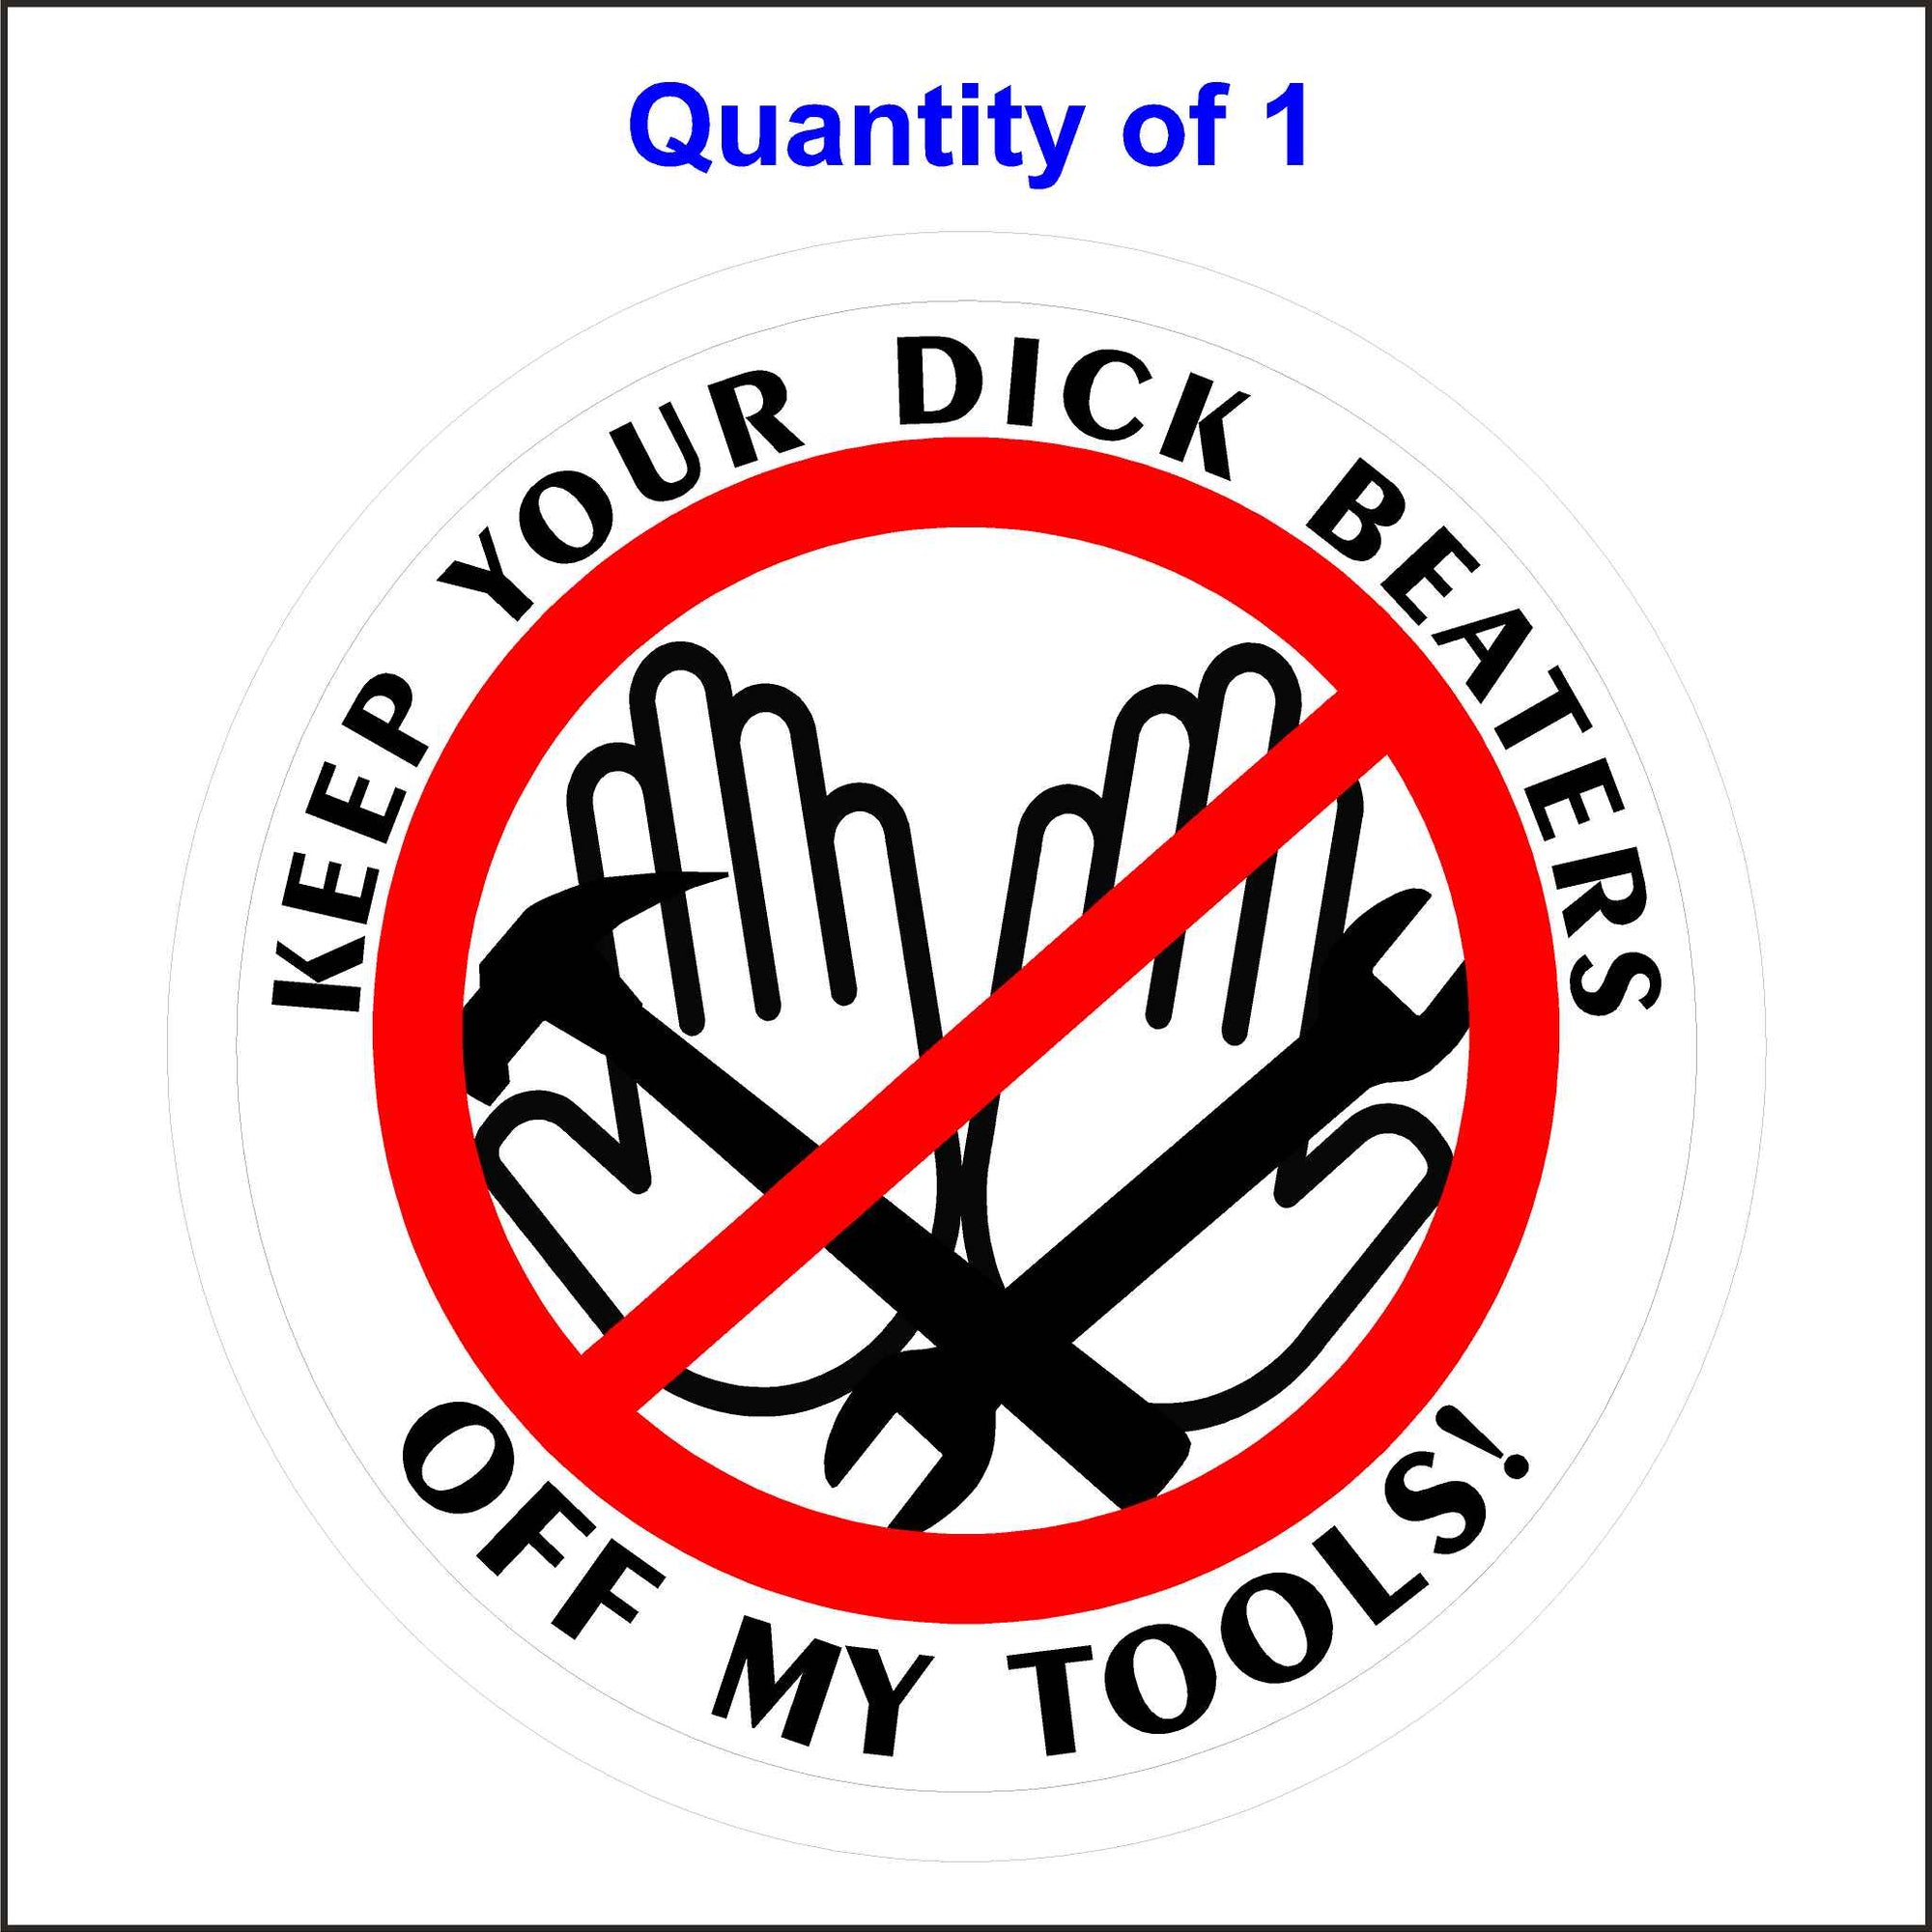 Keep Your Dick Beaters Off My Tools Sticker.